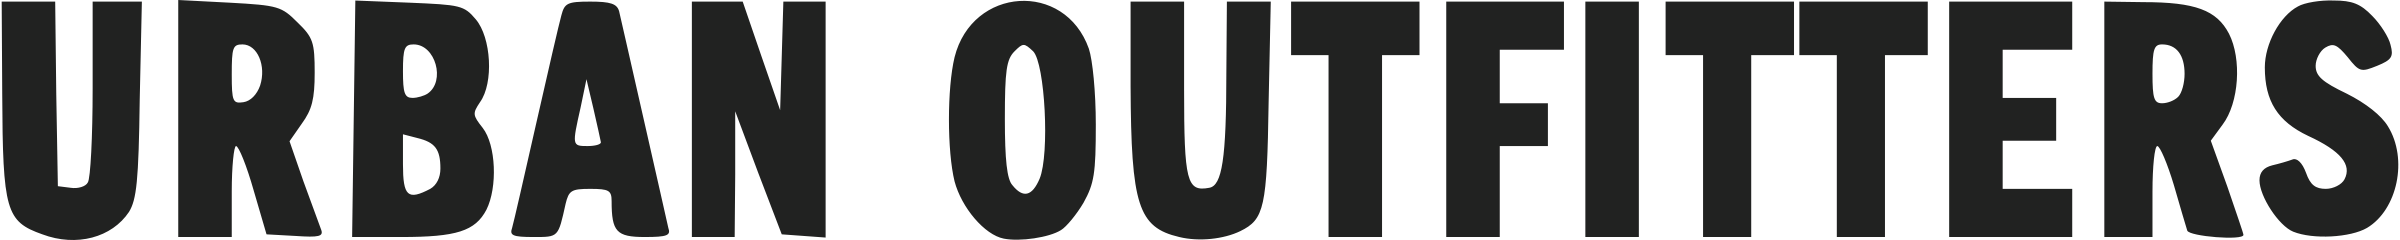 urban-outfitters-1-logo-png-transparent.png